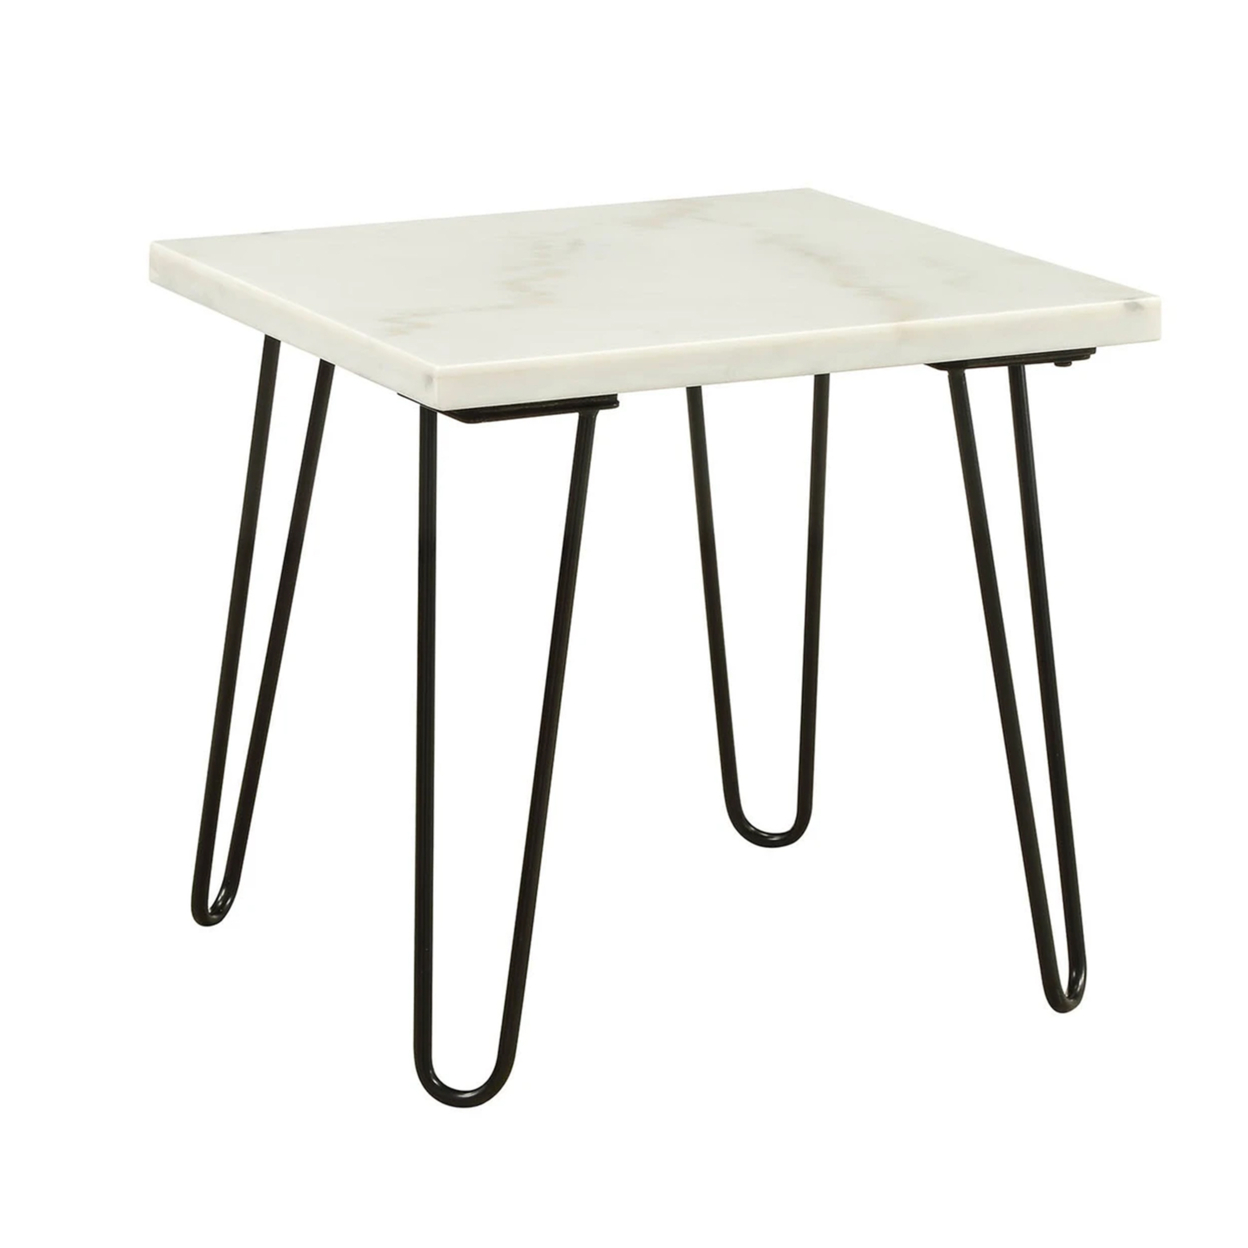 Marble Top End Table With Hairpin Style Metal Legs, White And Black- Saltoro Sherpi